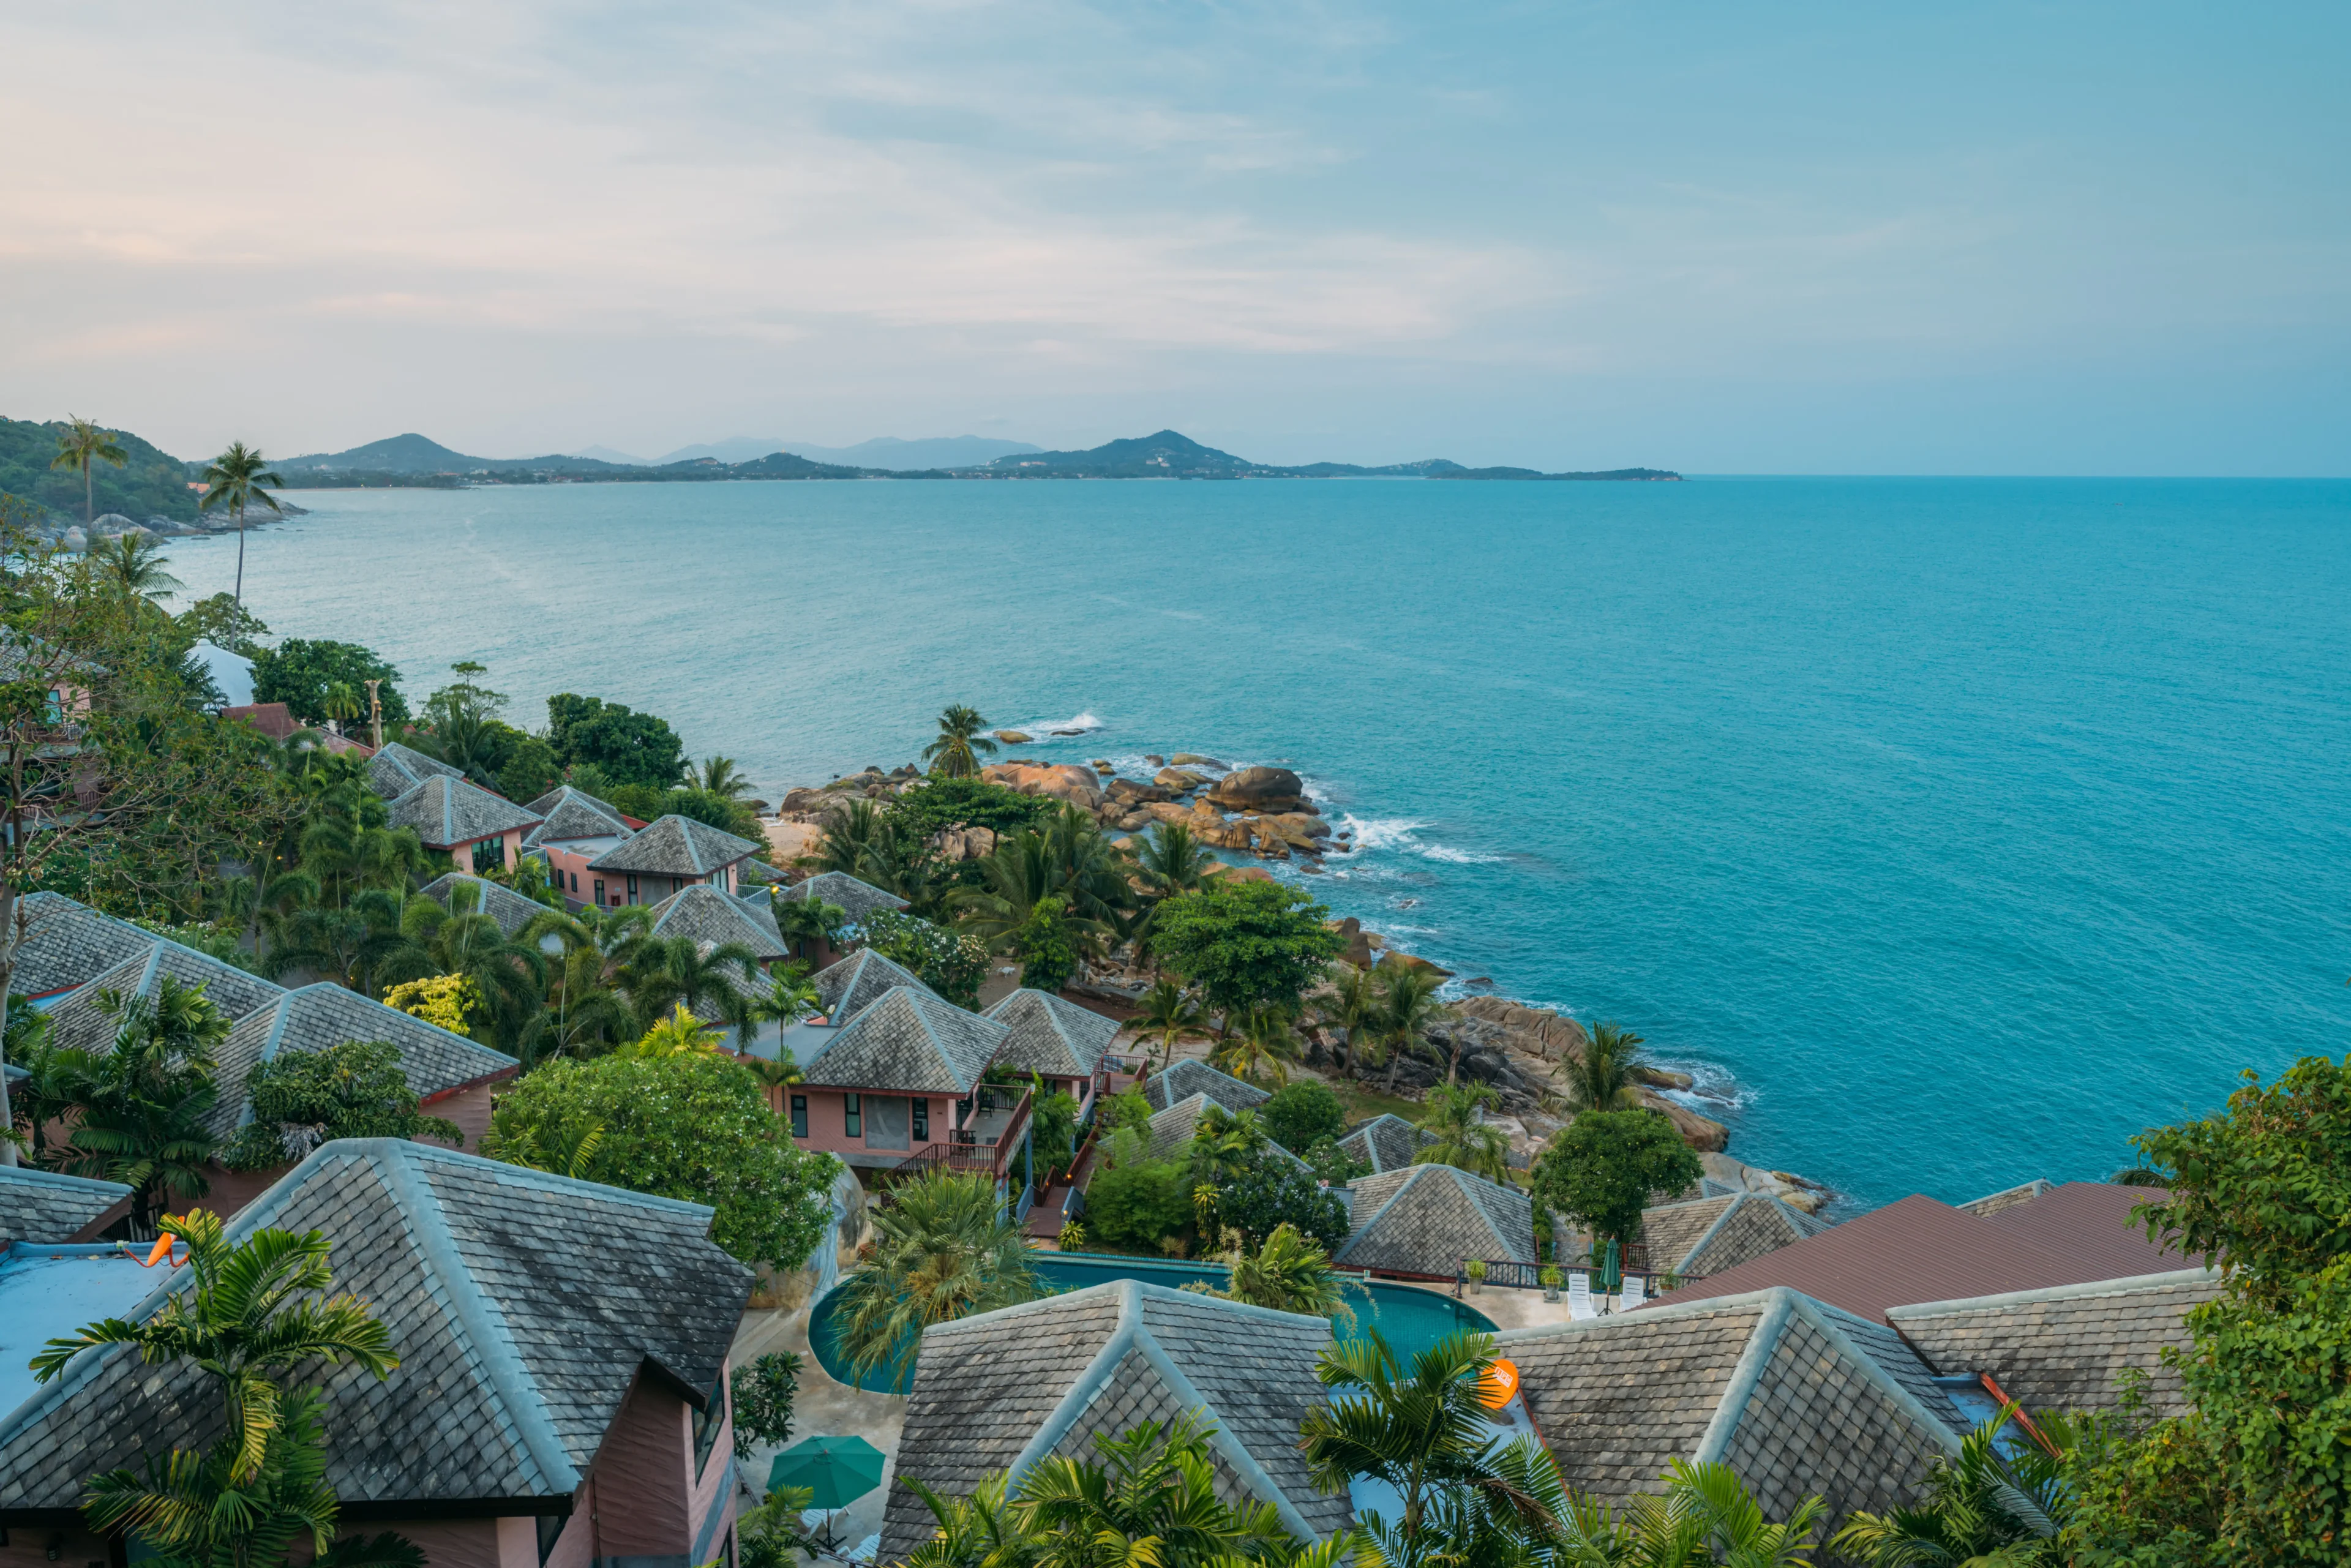 Hotels and Resorts to stay in Koh Samui